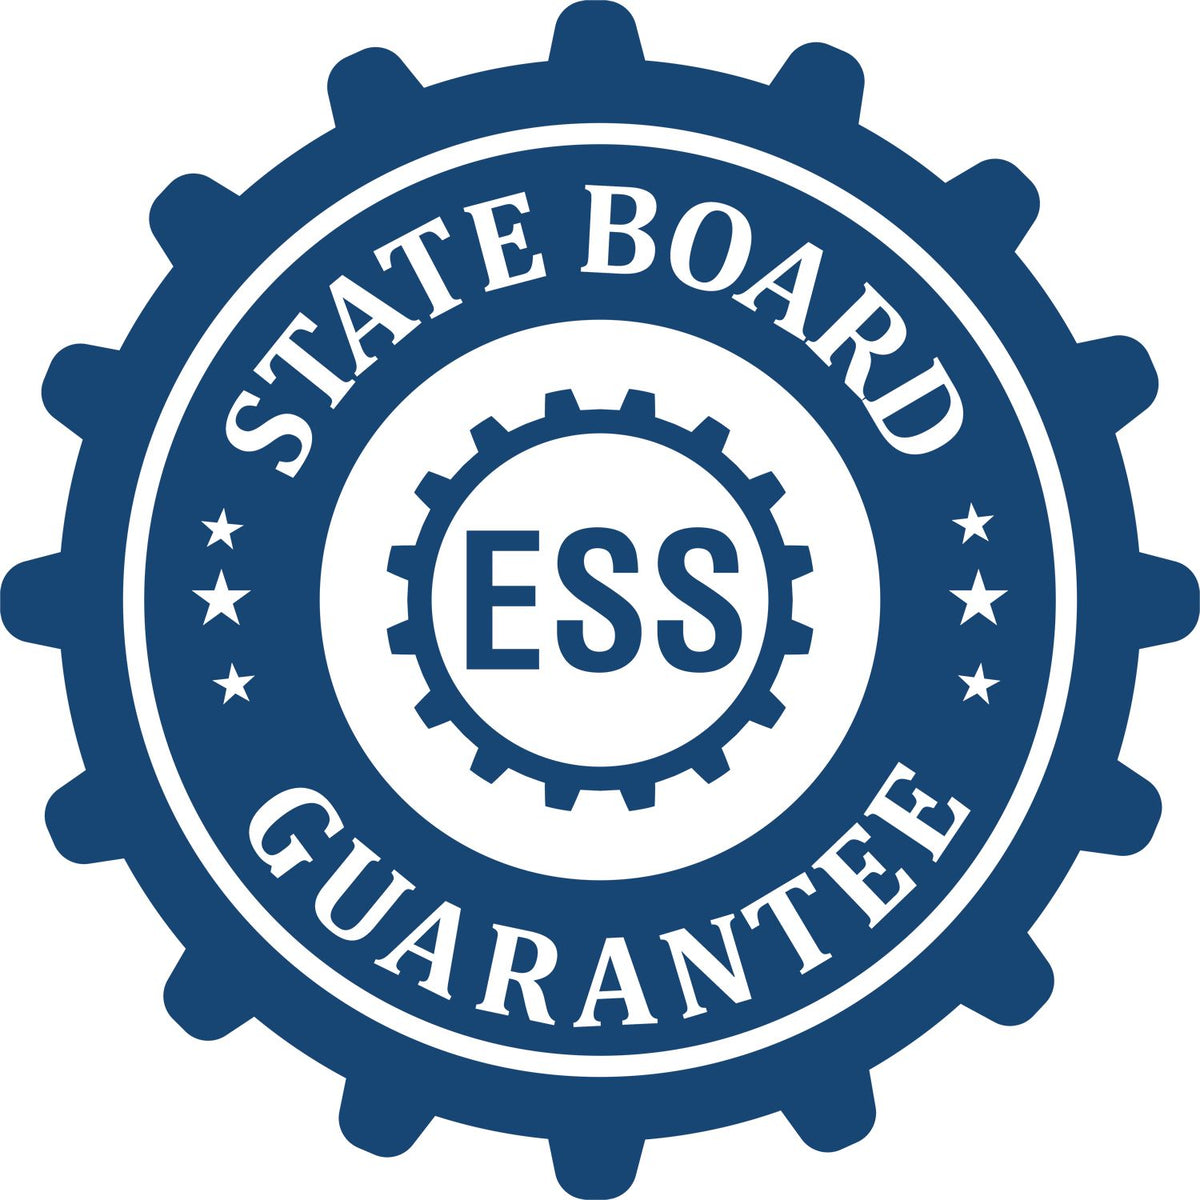 An emblem in a gear shape illustrating a state board guarantee for the Digital Georgia Landscape Architect Stamp product.